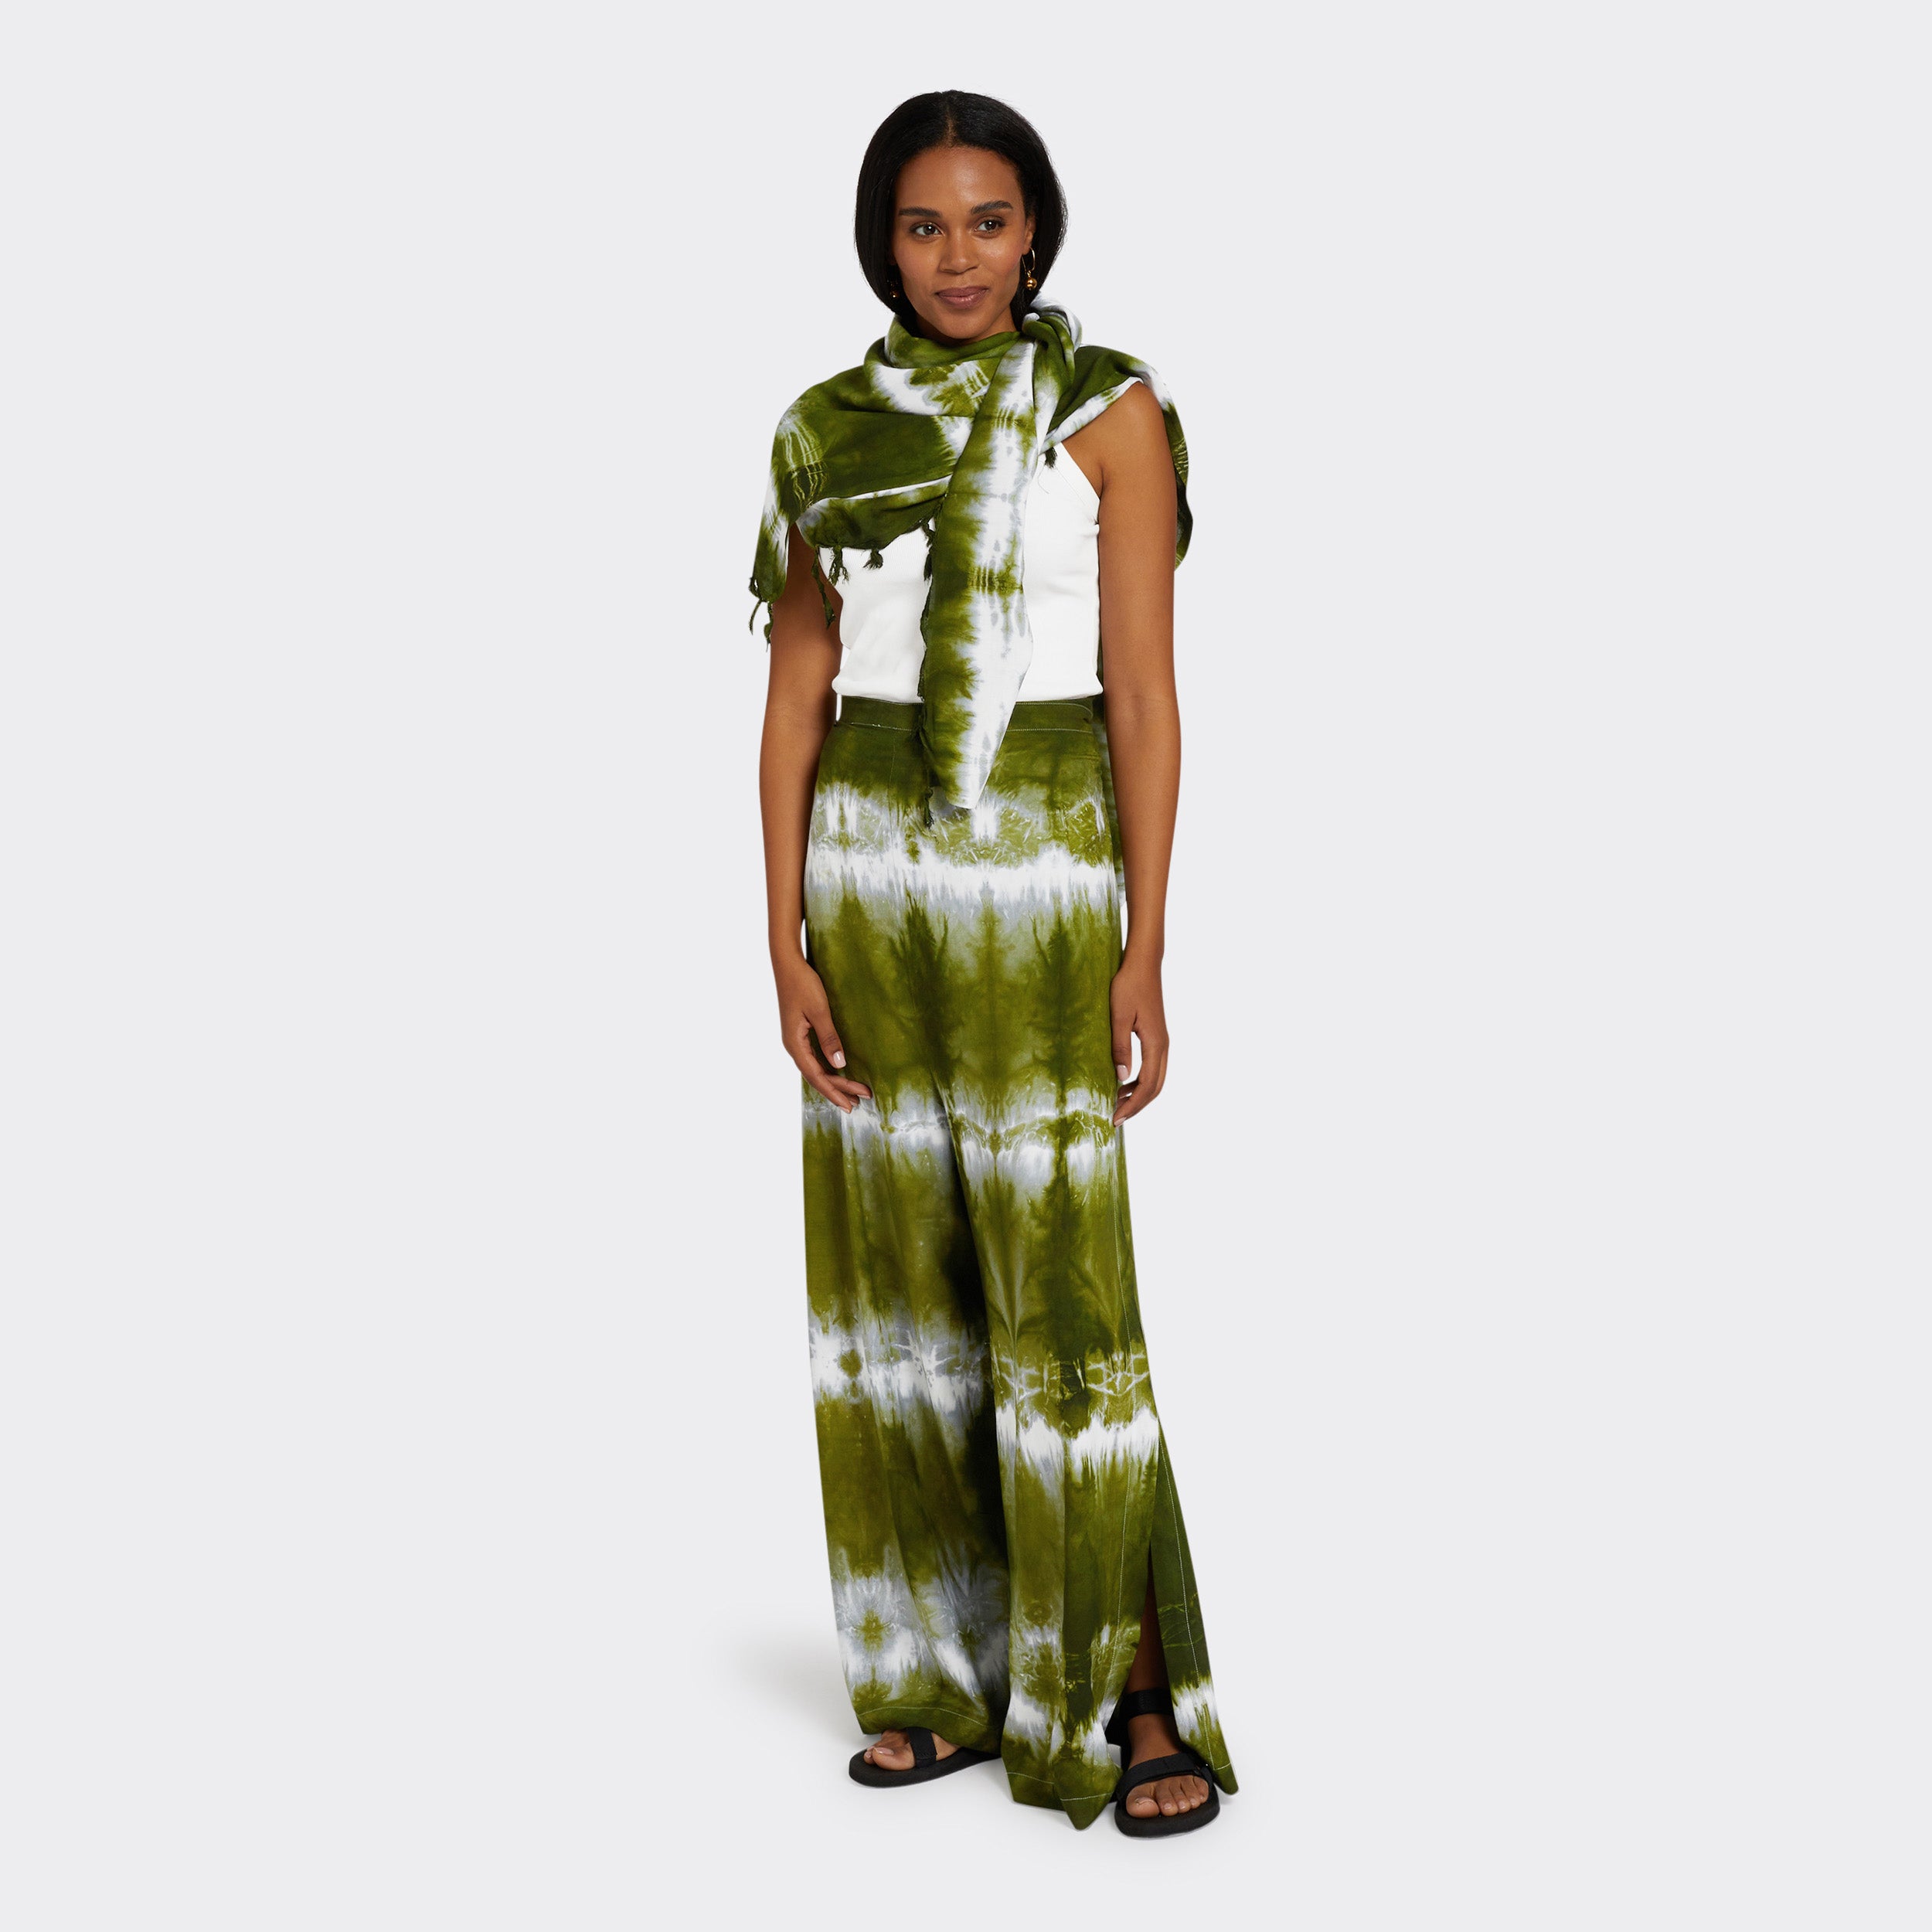 Model wears Wrap Trousers in Tie Dye Intense Green with a plain white top and a Pareo in Tie Dye Intense Green as a shawl.